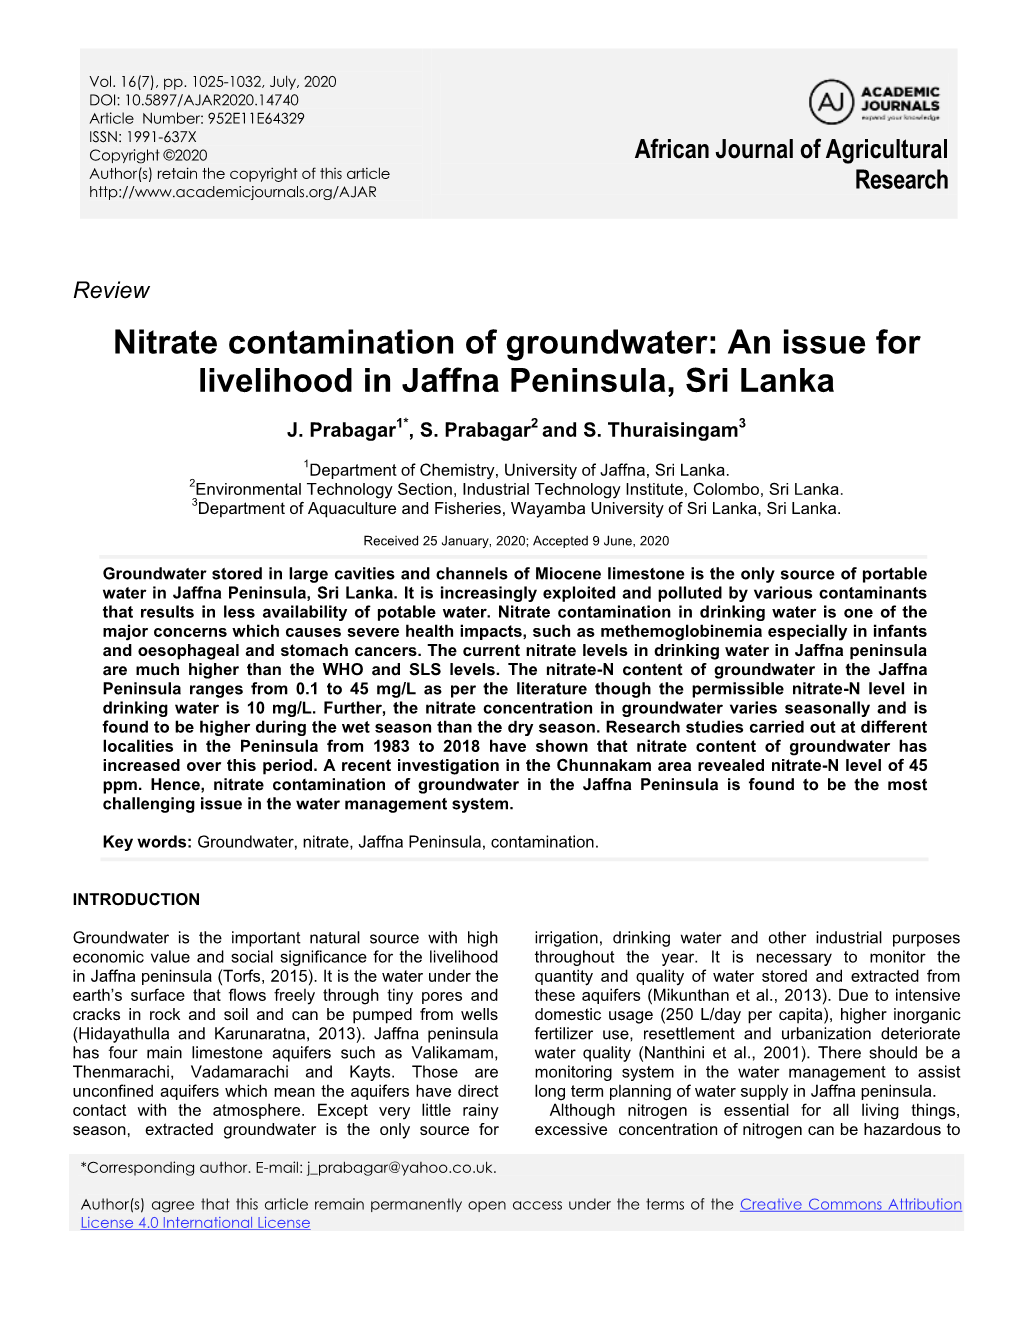 Nitrate Contamination of Groundwater: an Issue for Livelihood in Jaffna Peninsula, Sri Lanka